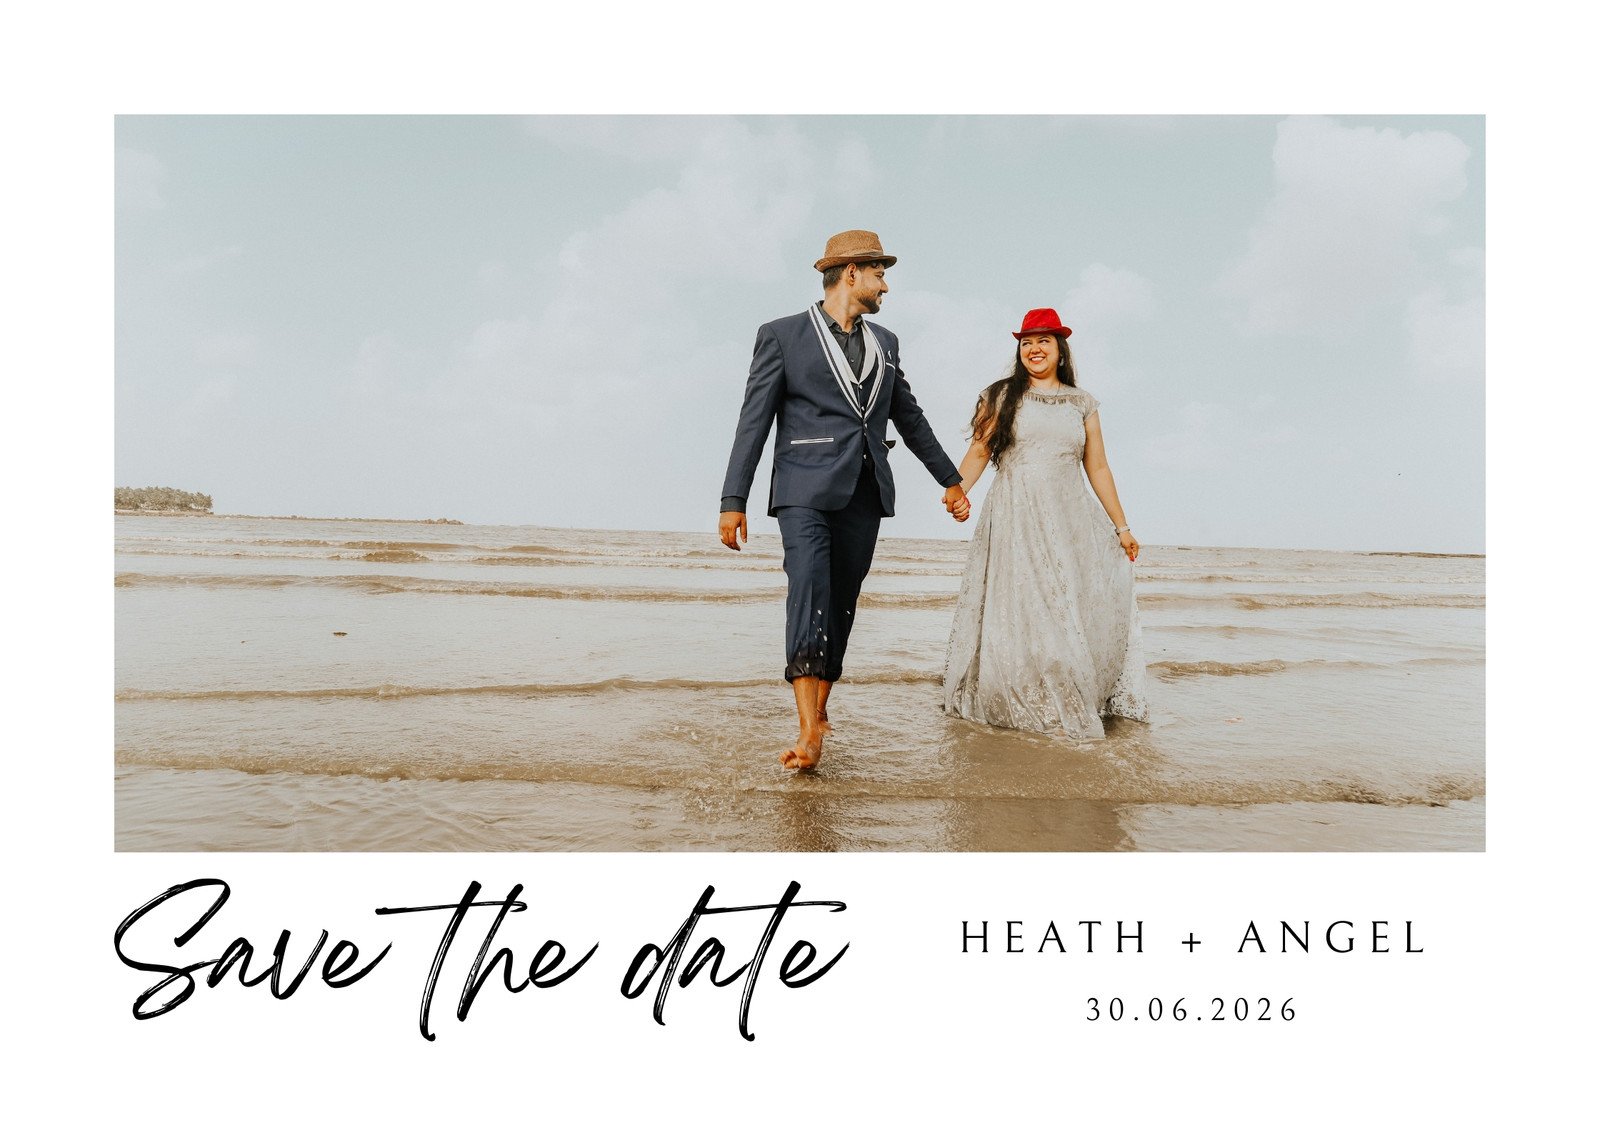 Save The Date Ideas For Wedding - Crafty Art